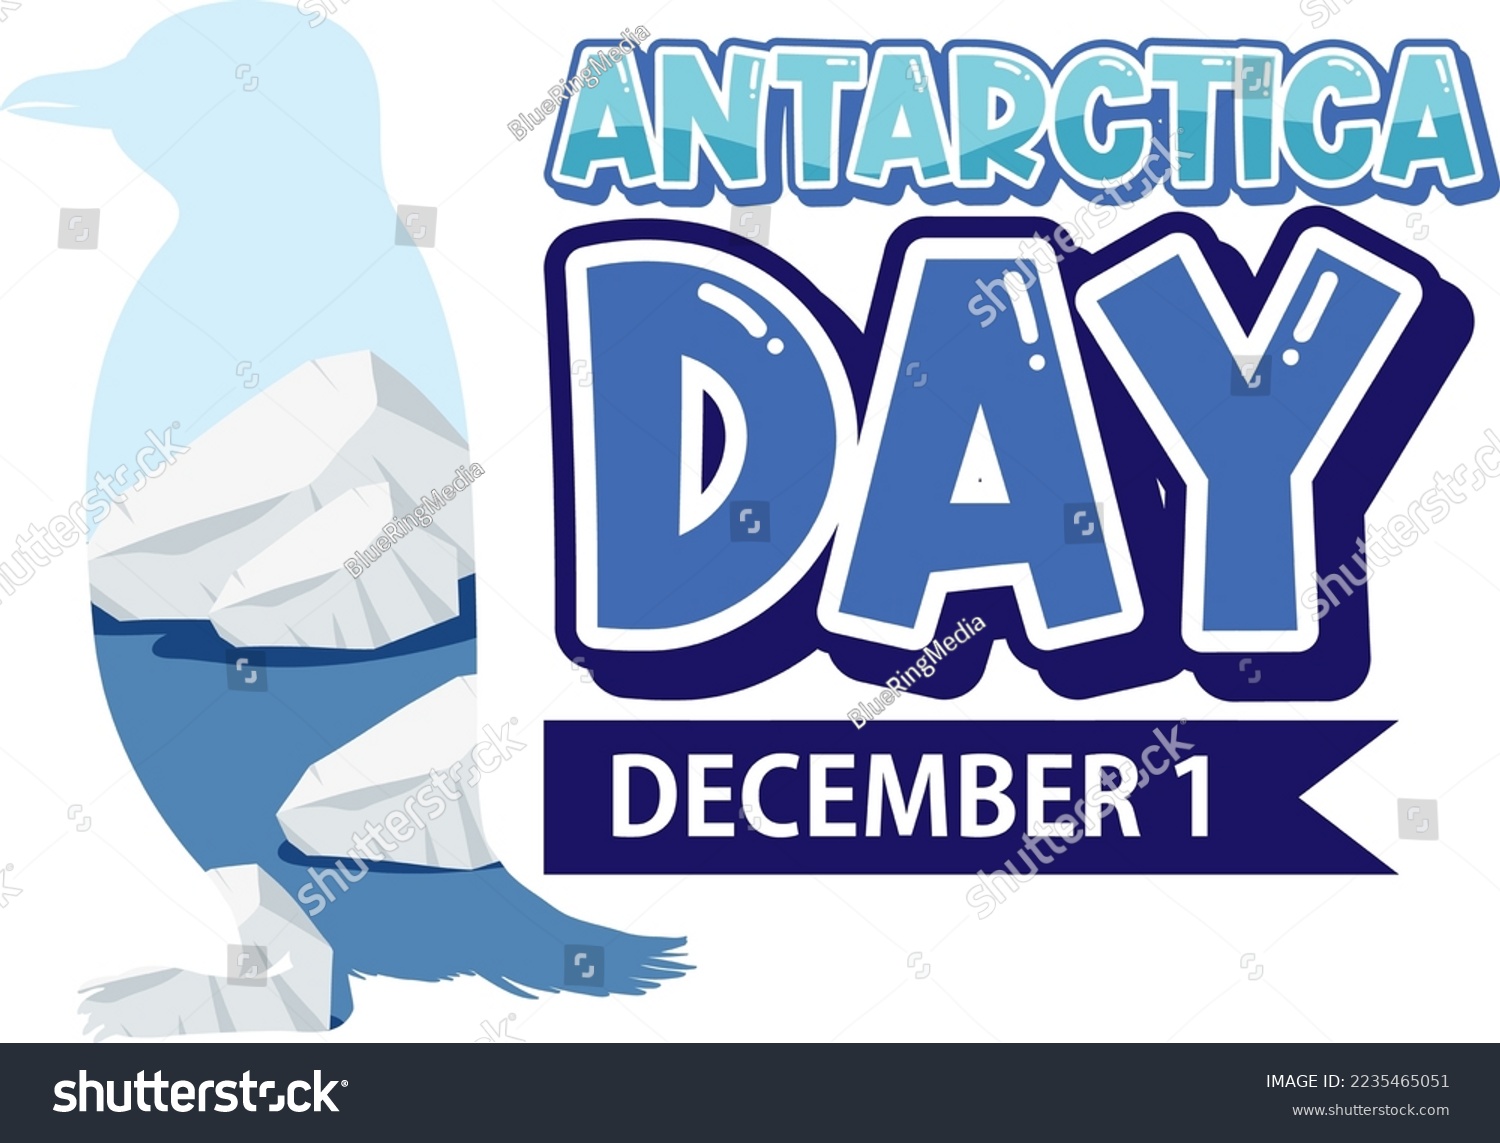 SVG of Antarctica day text with illustration svg